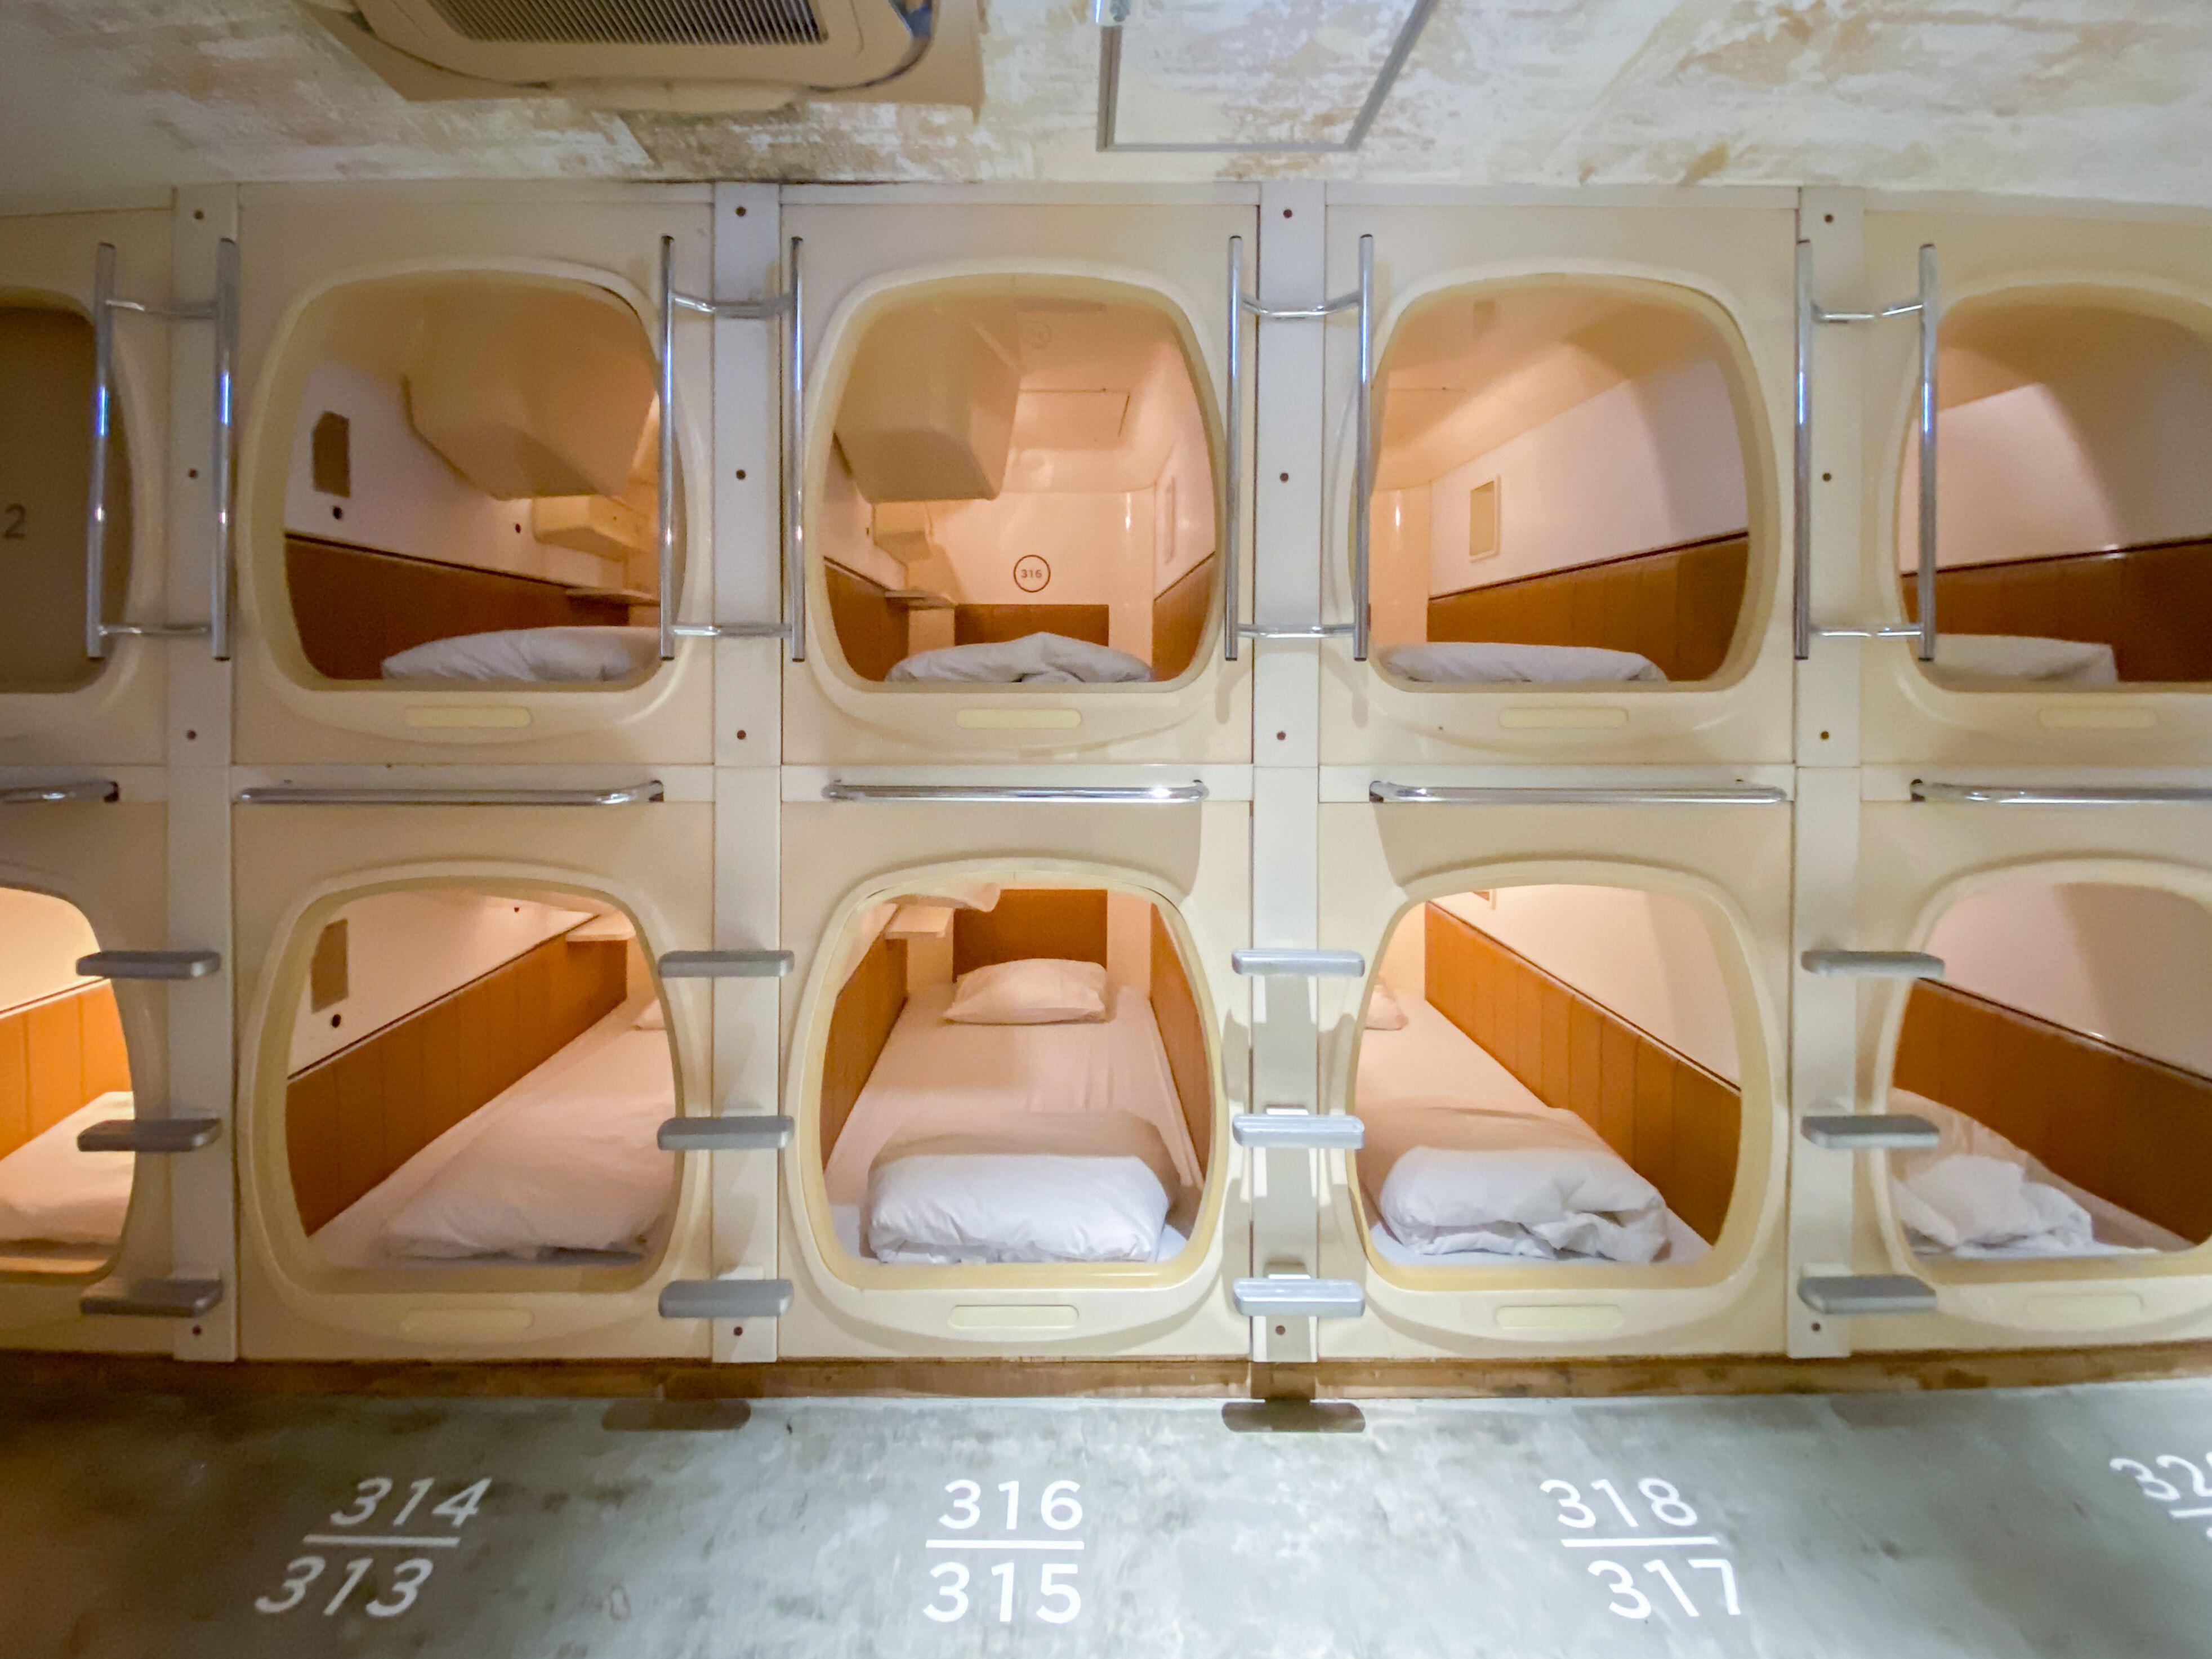 <p>For anyone looking for an authentic capsule hotel experience, there is no better place to visit than where the concept originated: Osaka. Though there are many similar properties throughout the city, Capsule Inn, which opened in 1979, was the world’s first micro hotel. Designed by <a href="https://www.uniqhotels.com/capsule-inn-osaka-the-first-capsule-hotel-in-the-world">Kisho Kurokawa</a>, the architect of Nakagin Capsule Tower, the hotel encapsulated <a href="https://www.architecturaldigest.com/gallery/luxurious-hotels-japan?mbid=synd_msn_rss&utm_source=msn&utm_medium=syndication">Japanese</a> efficiency and compact design. It’s worth noting, however, that the hotel is currently only available for male travelers. According to many Japanese travel blogs, the accommodations were originally designed by “traveling businessmen,” and though there are now co-ed outposts as well as capsule hotels for women, in many locations this separation has remained.</p> <p><em>Book now: <a href="https://cna.st/affiliate-link/MKEh7BpQXwWWMwkaAq1Ttt67a4tqPU2Wj6AcssobvDiPoxegcCdZQBbBVYWu3Ci3JFyQrg2ZT4YHtJ2eQE4UqsjJECiDzYV5Qu86jwTGyQMDNUkrx8XfdLs73xw9oBiD9p54mzTTiKEWKBeeREnEVYJLFvHkxPYDJ" rel="sponsored">Capsule Inn Osaka</a></em></p><p>Sign up for our newsletter to get the latest in design, decorating, celebrity style, shopping, and more.</p><a href="https://www.architecturaldigest.com/newsletter/subscribe?sourceCode=msnsend">Sign Up Now</a>